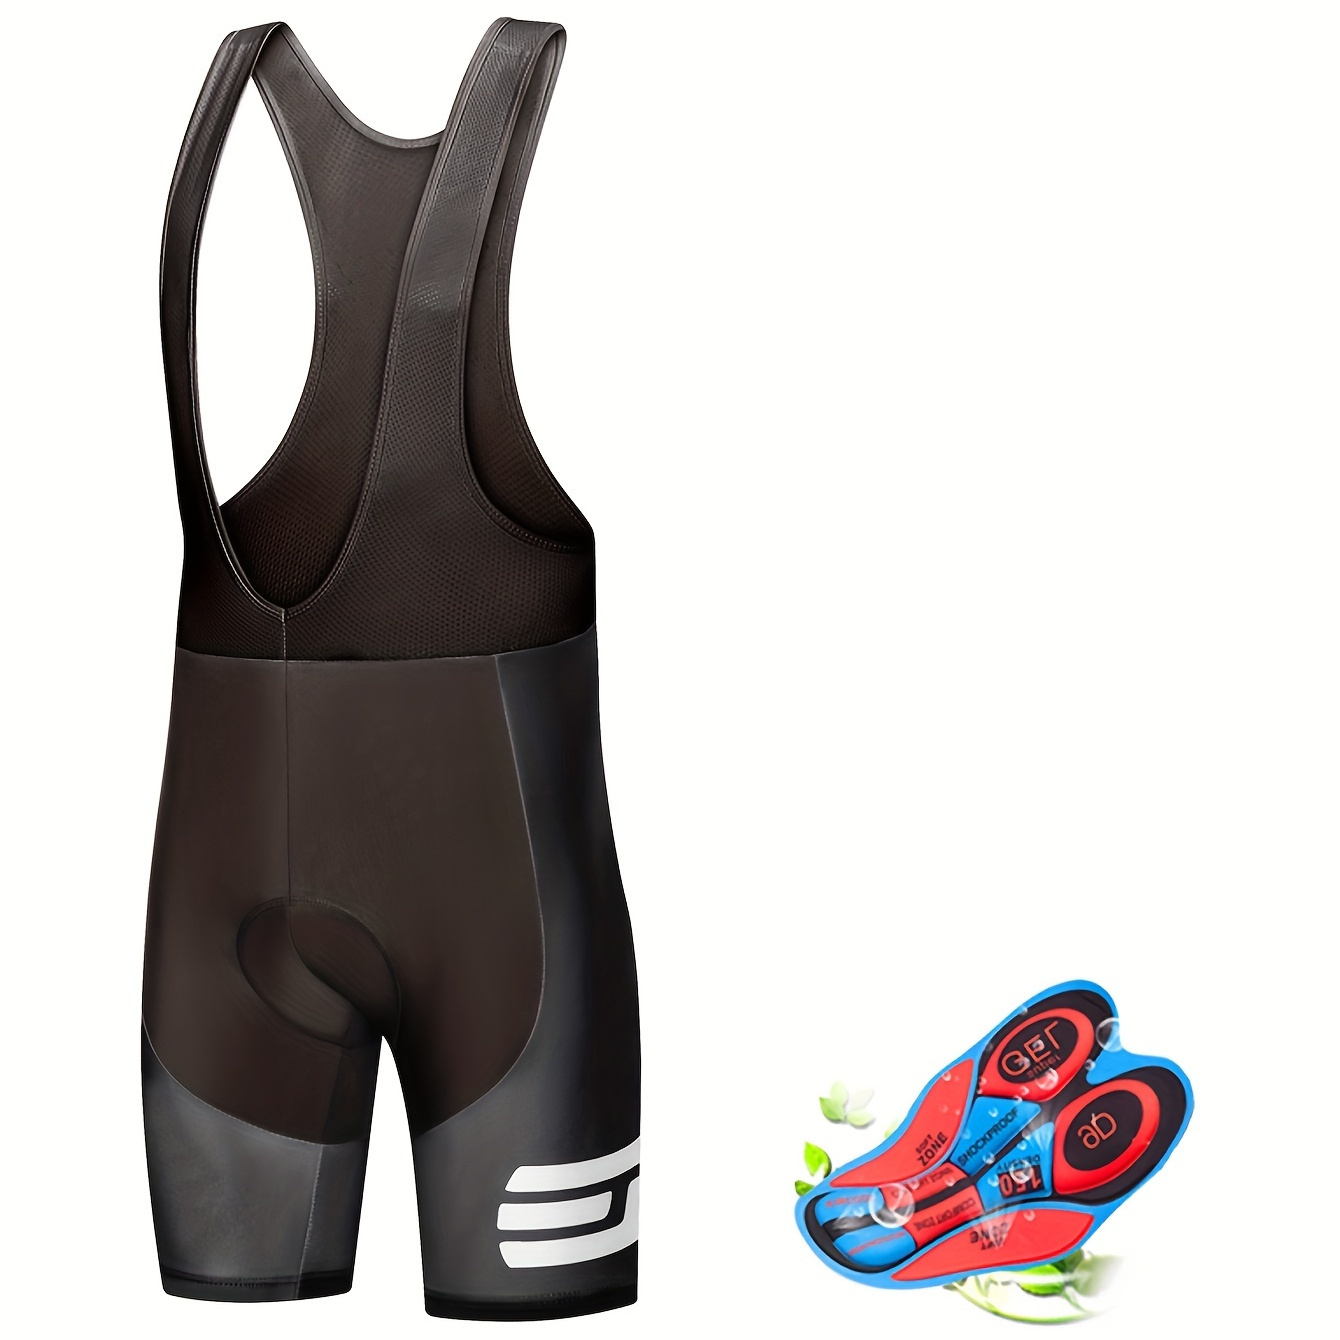 

Men's Cycling Bib Shorts - 9d Gel Padded Athletic Fit Breathable Bib Shorts, Ideal For All Seasons